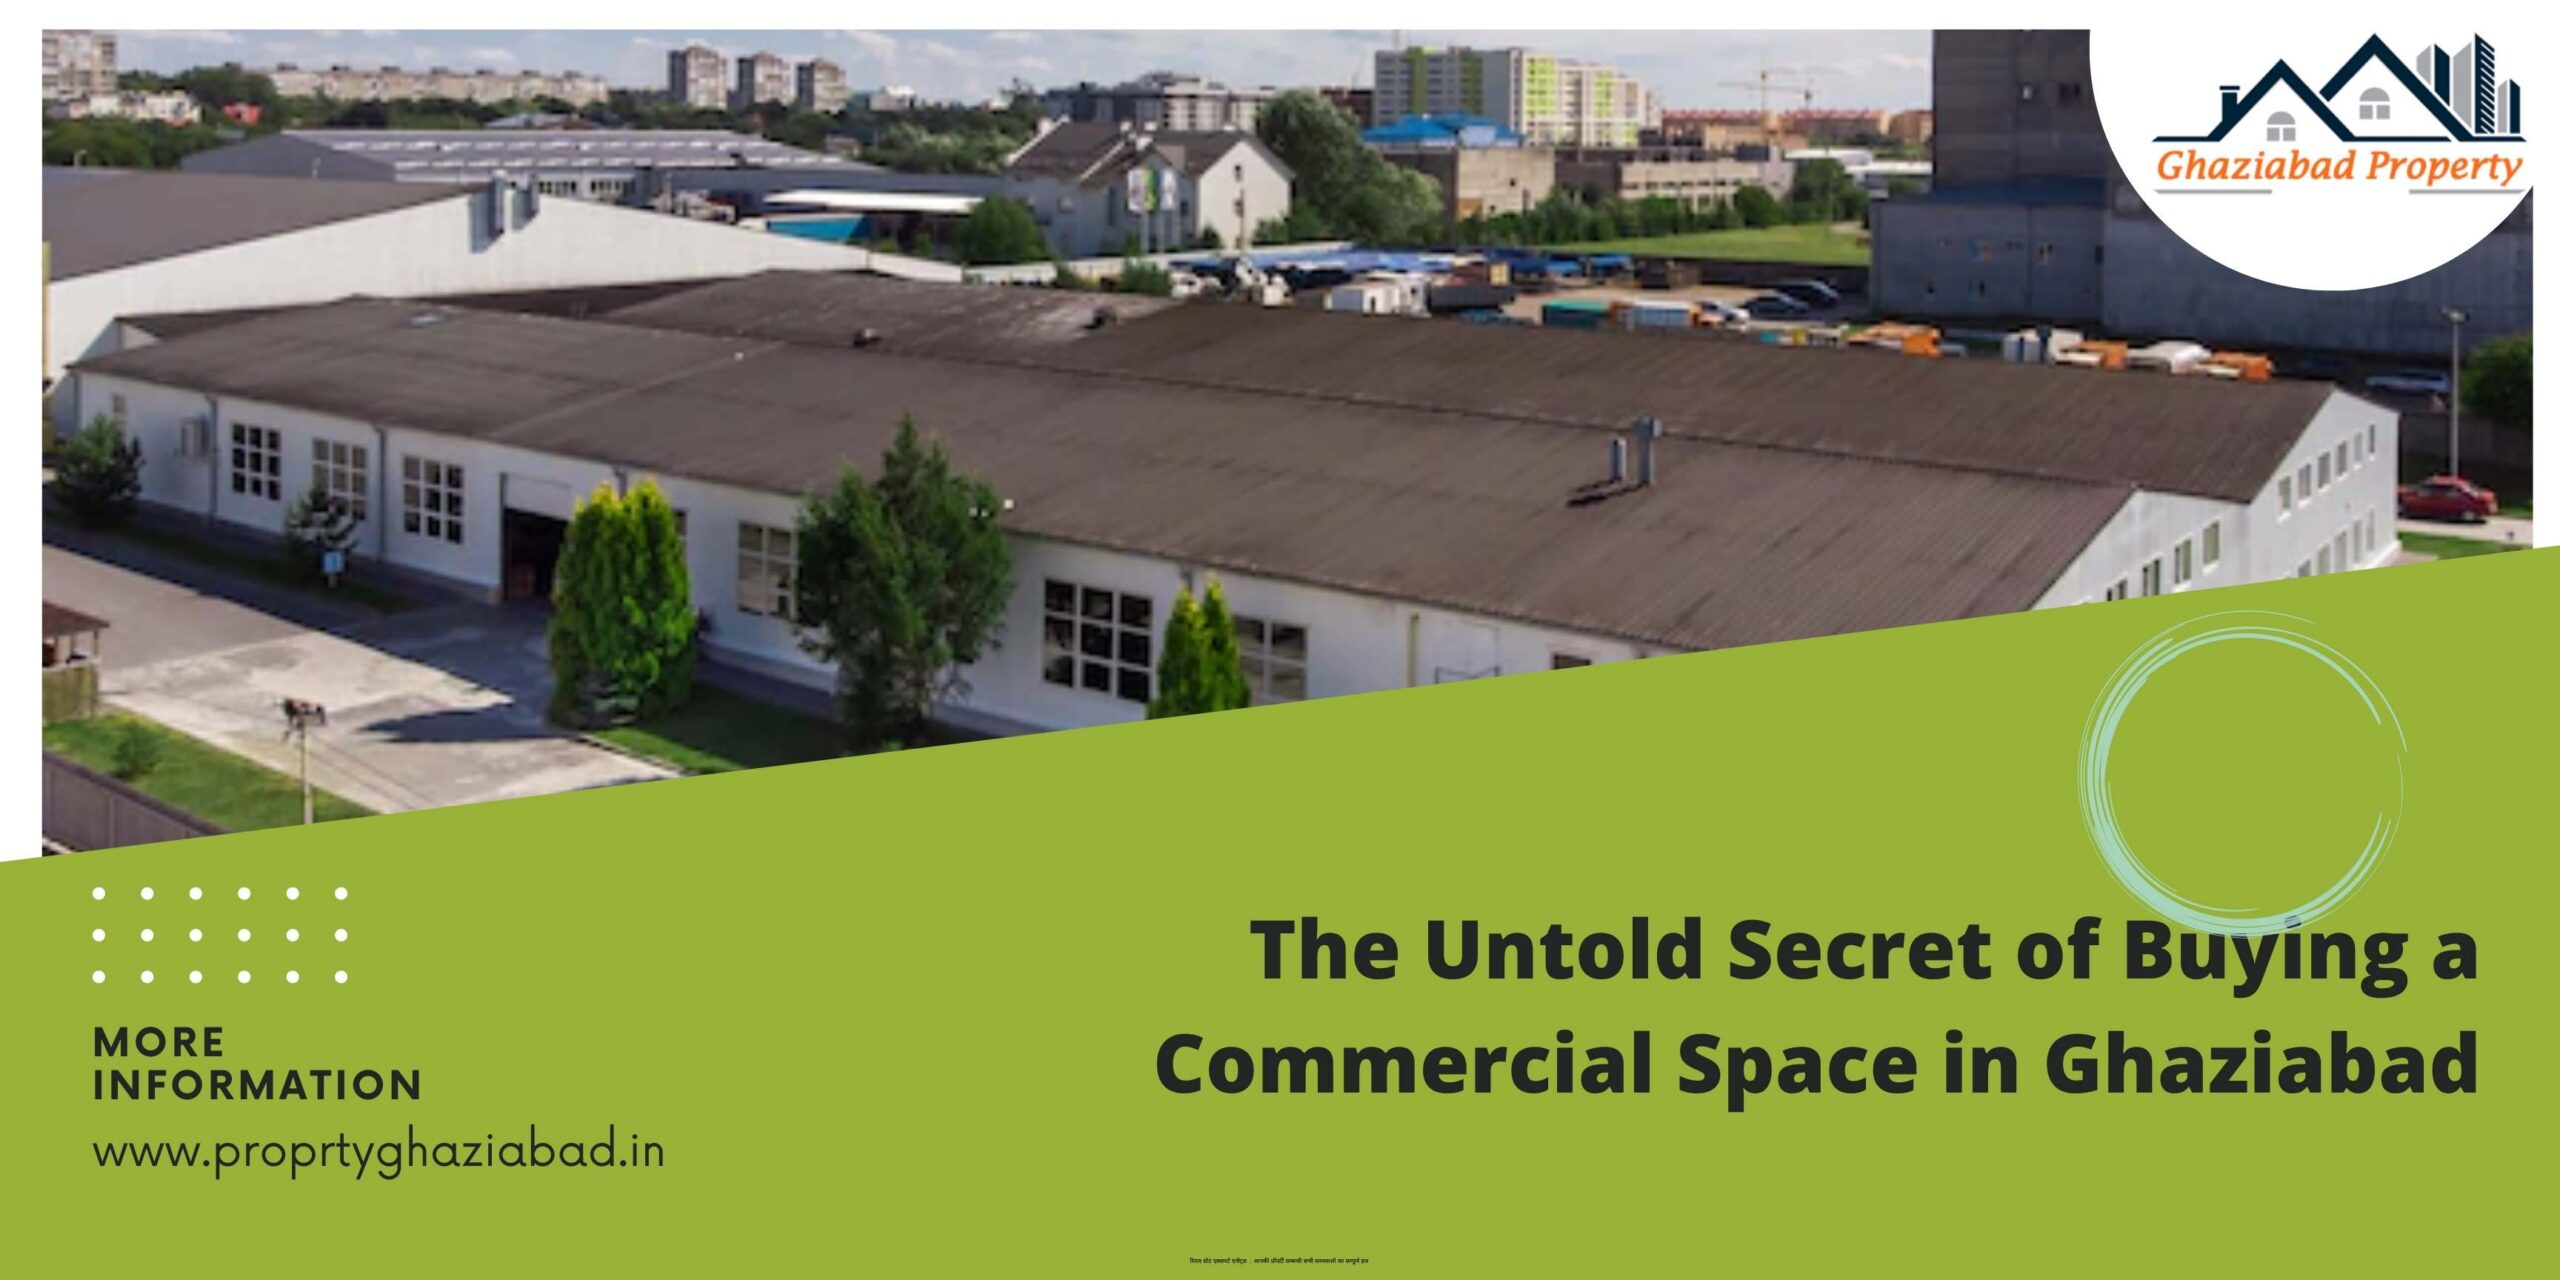 The Untold Secret of Buying a Commercial Space in Ghaziabad